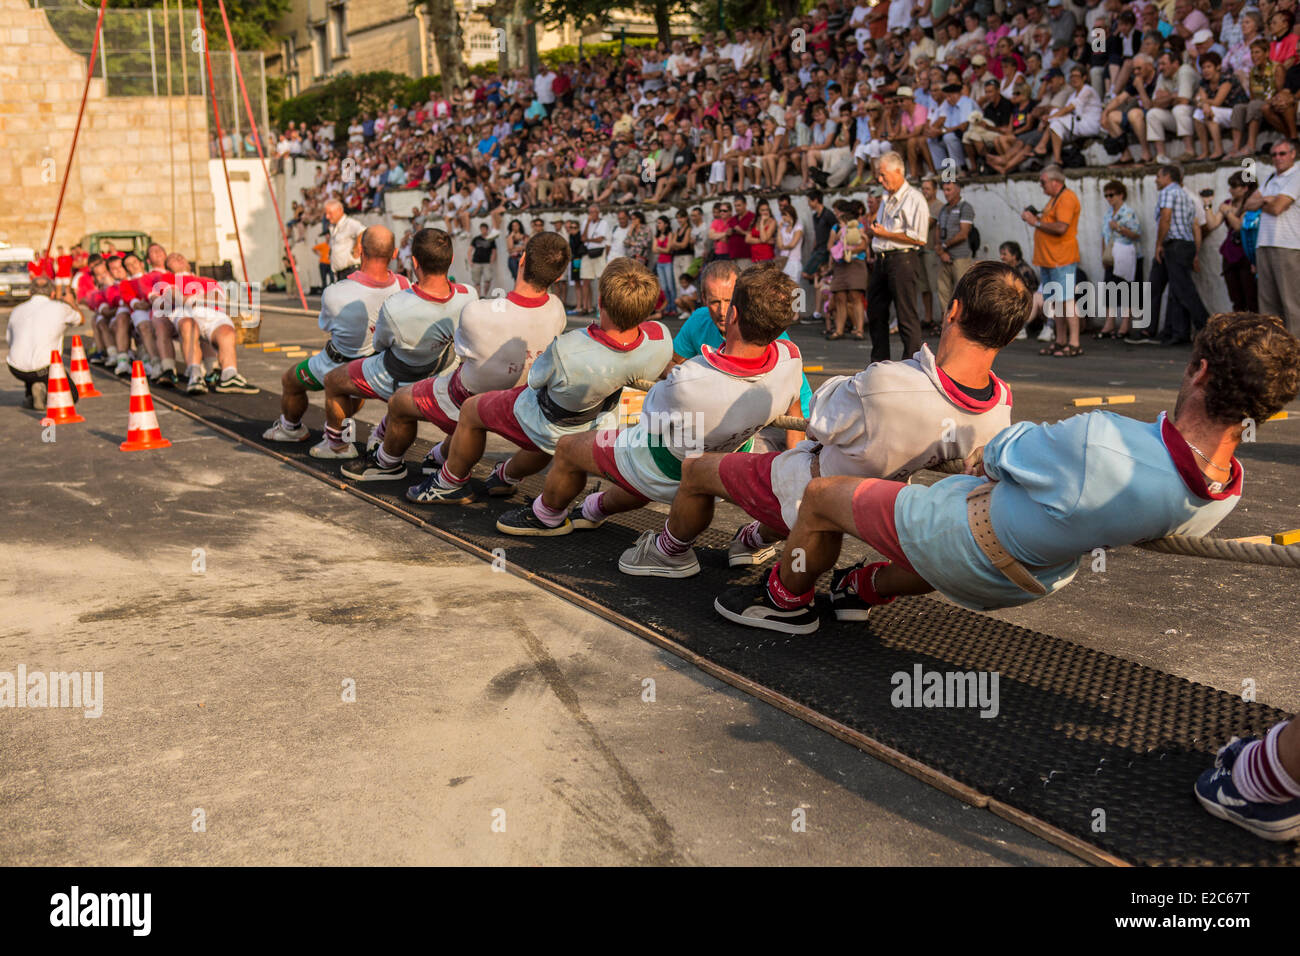 France, Pyrenees Atlantiques, Sare, labelled The Most Beautiful Villages of France, party of village, tug of war (soka tira) Stock Photo